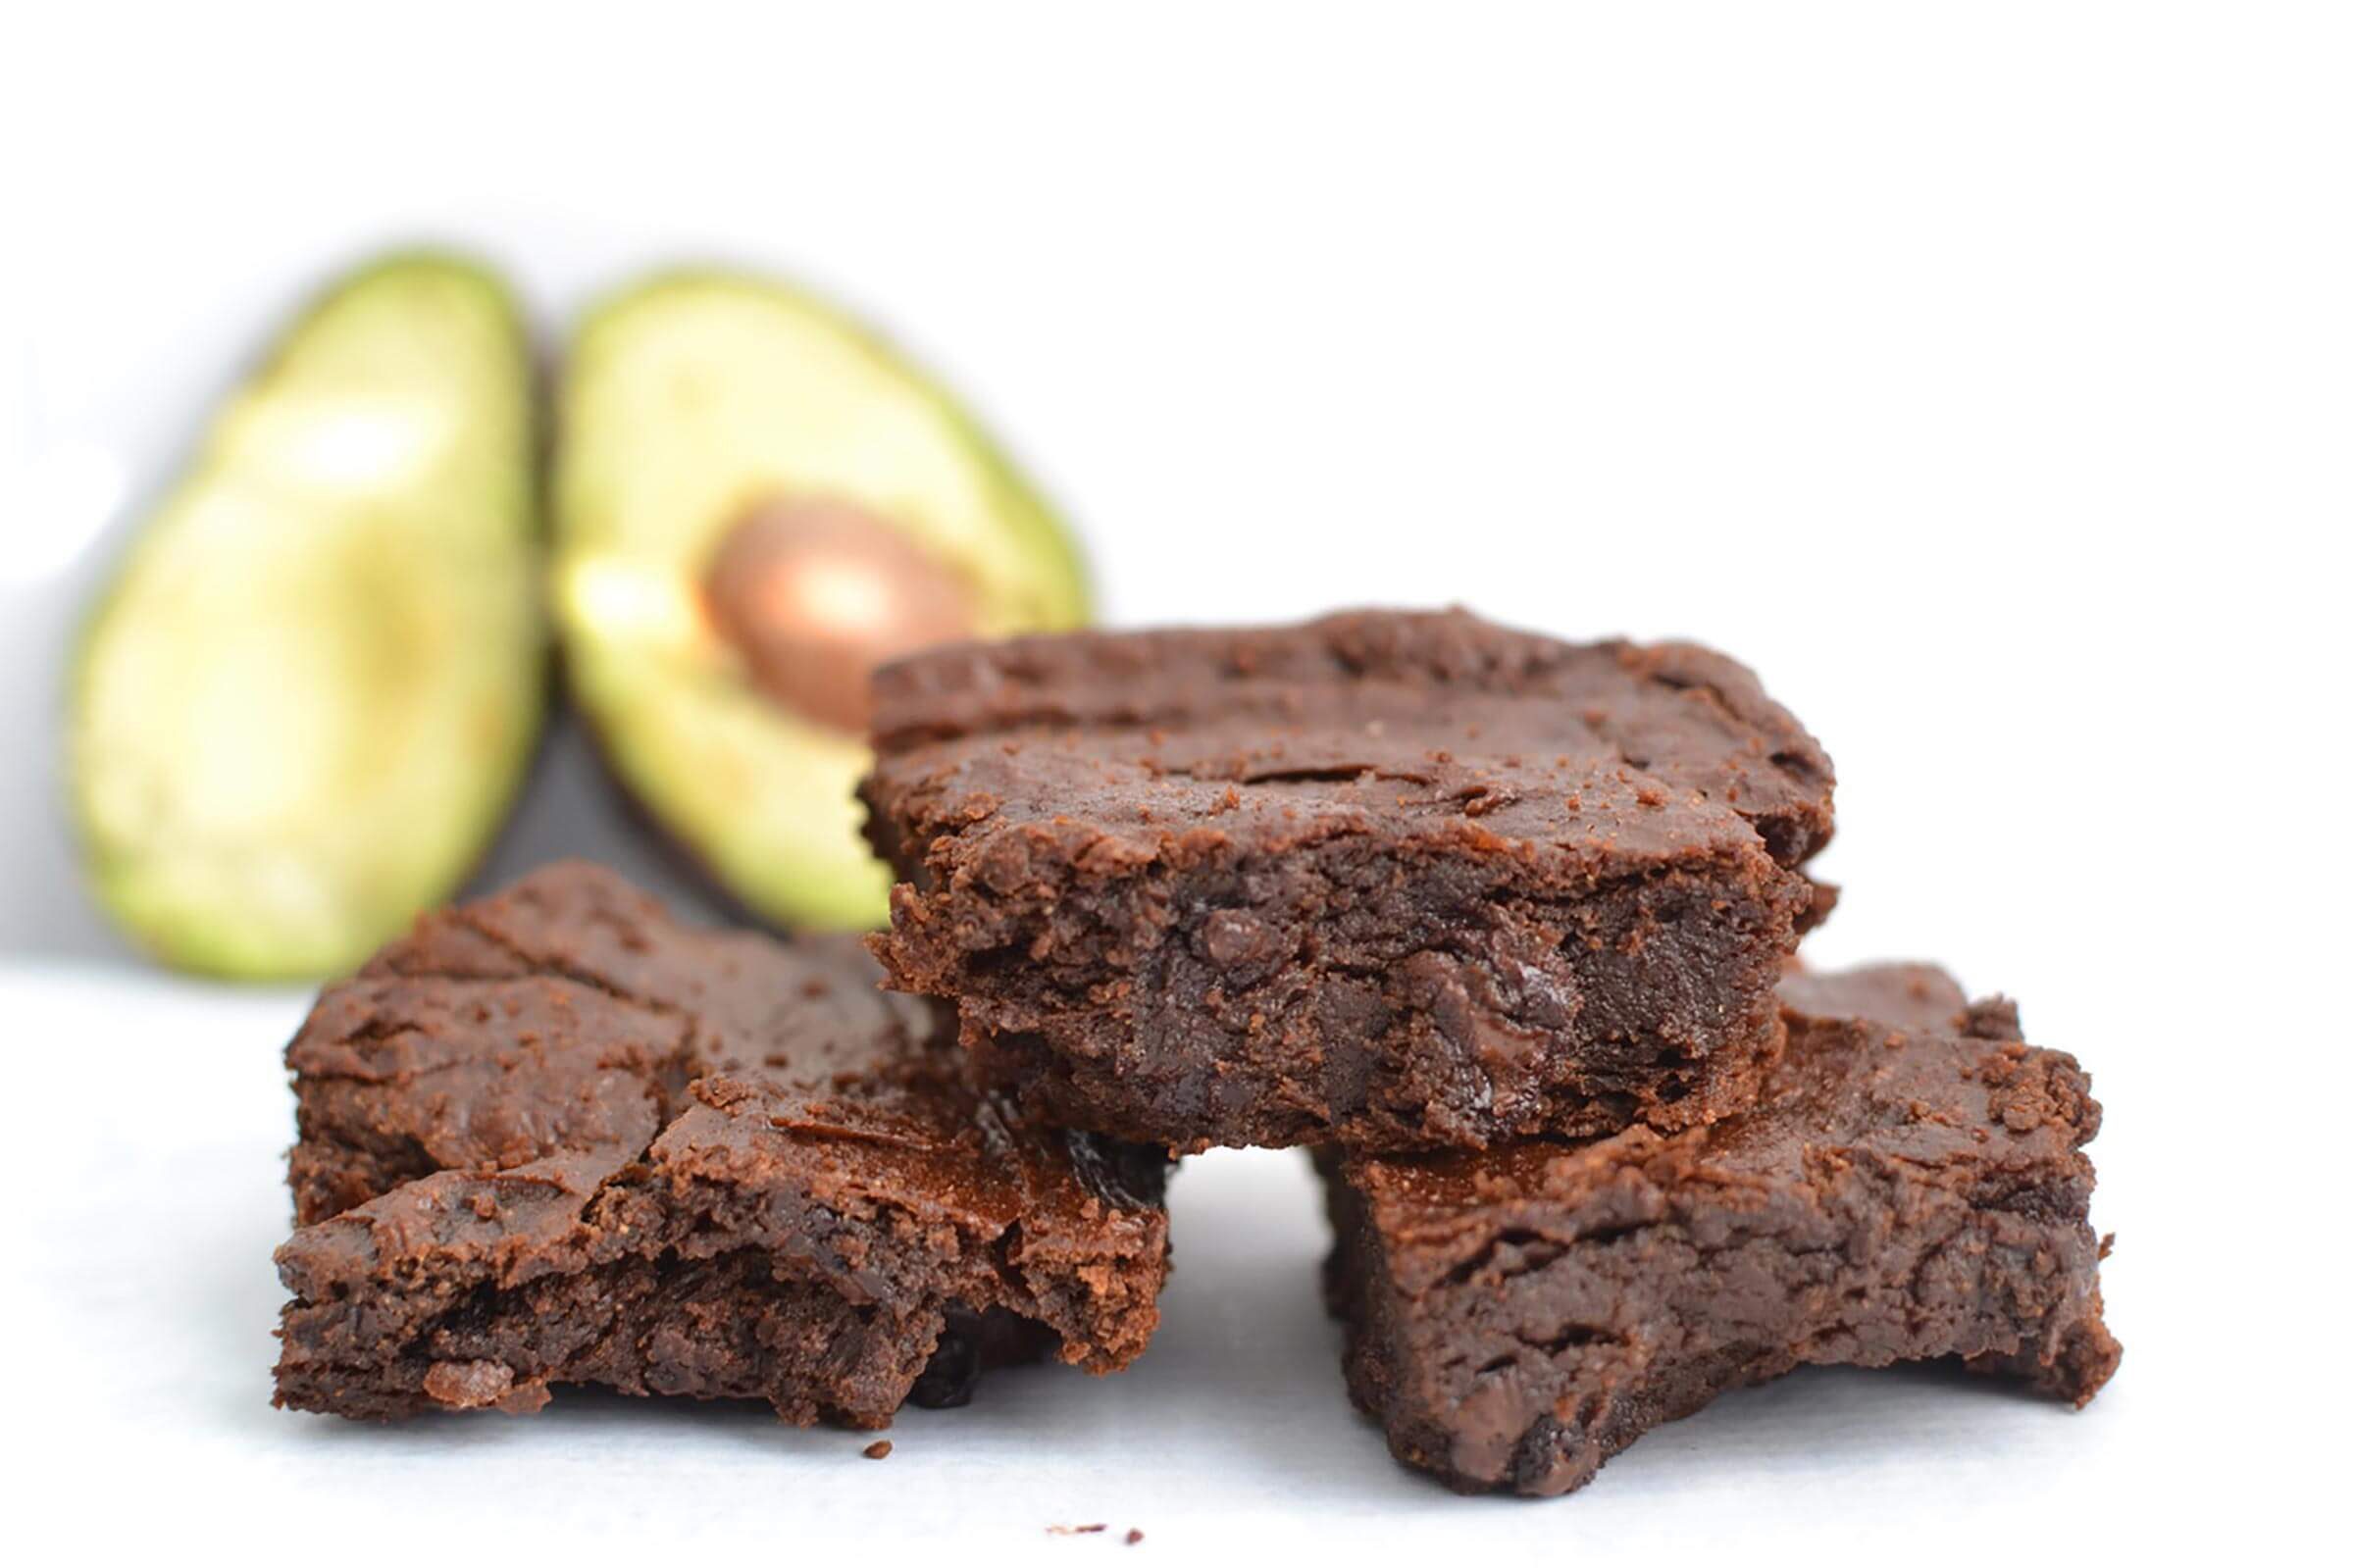 16 Delicious Avocado Recipes That Will Make Your Mouth Water